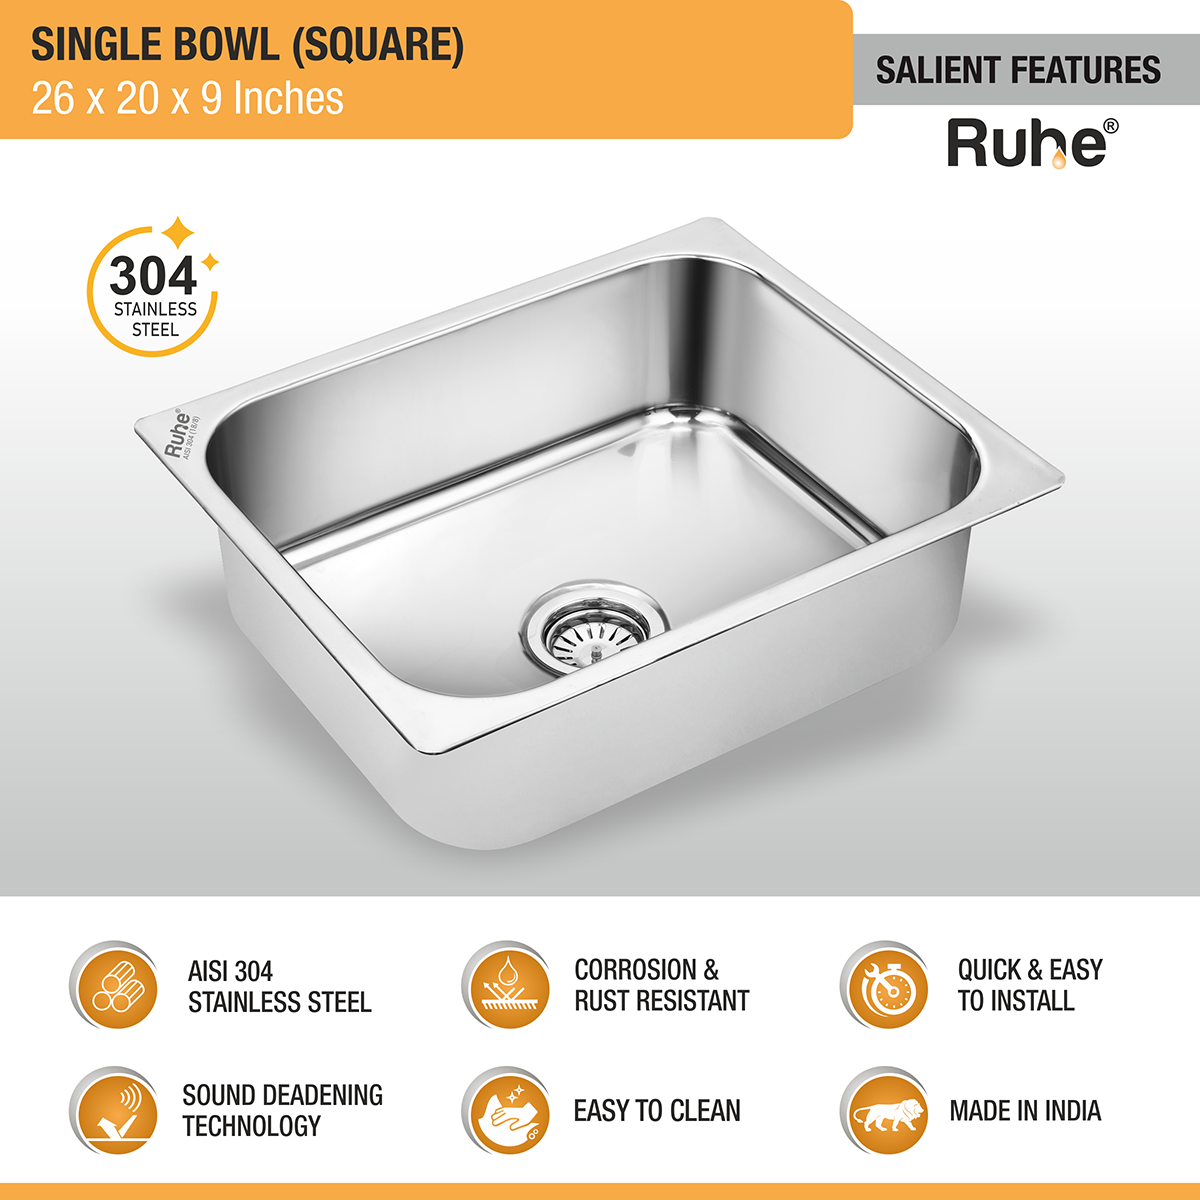 Square Single Bowl (26 x 20 x 9 inches) 304-Grade Kitchen Sink features and benefits